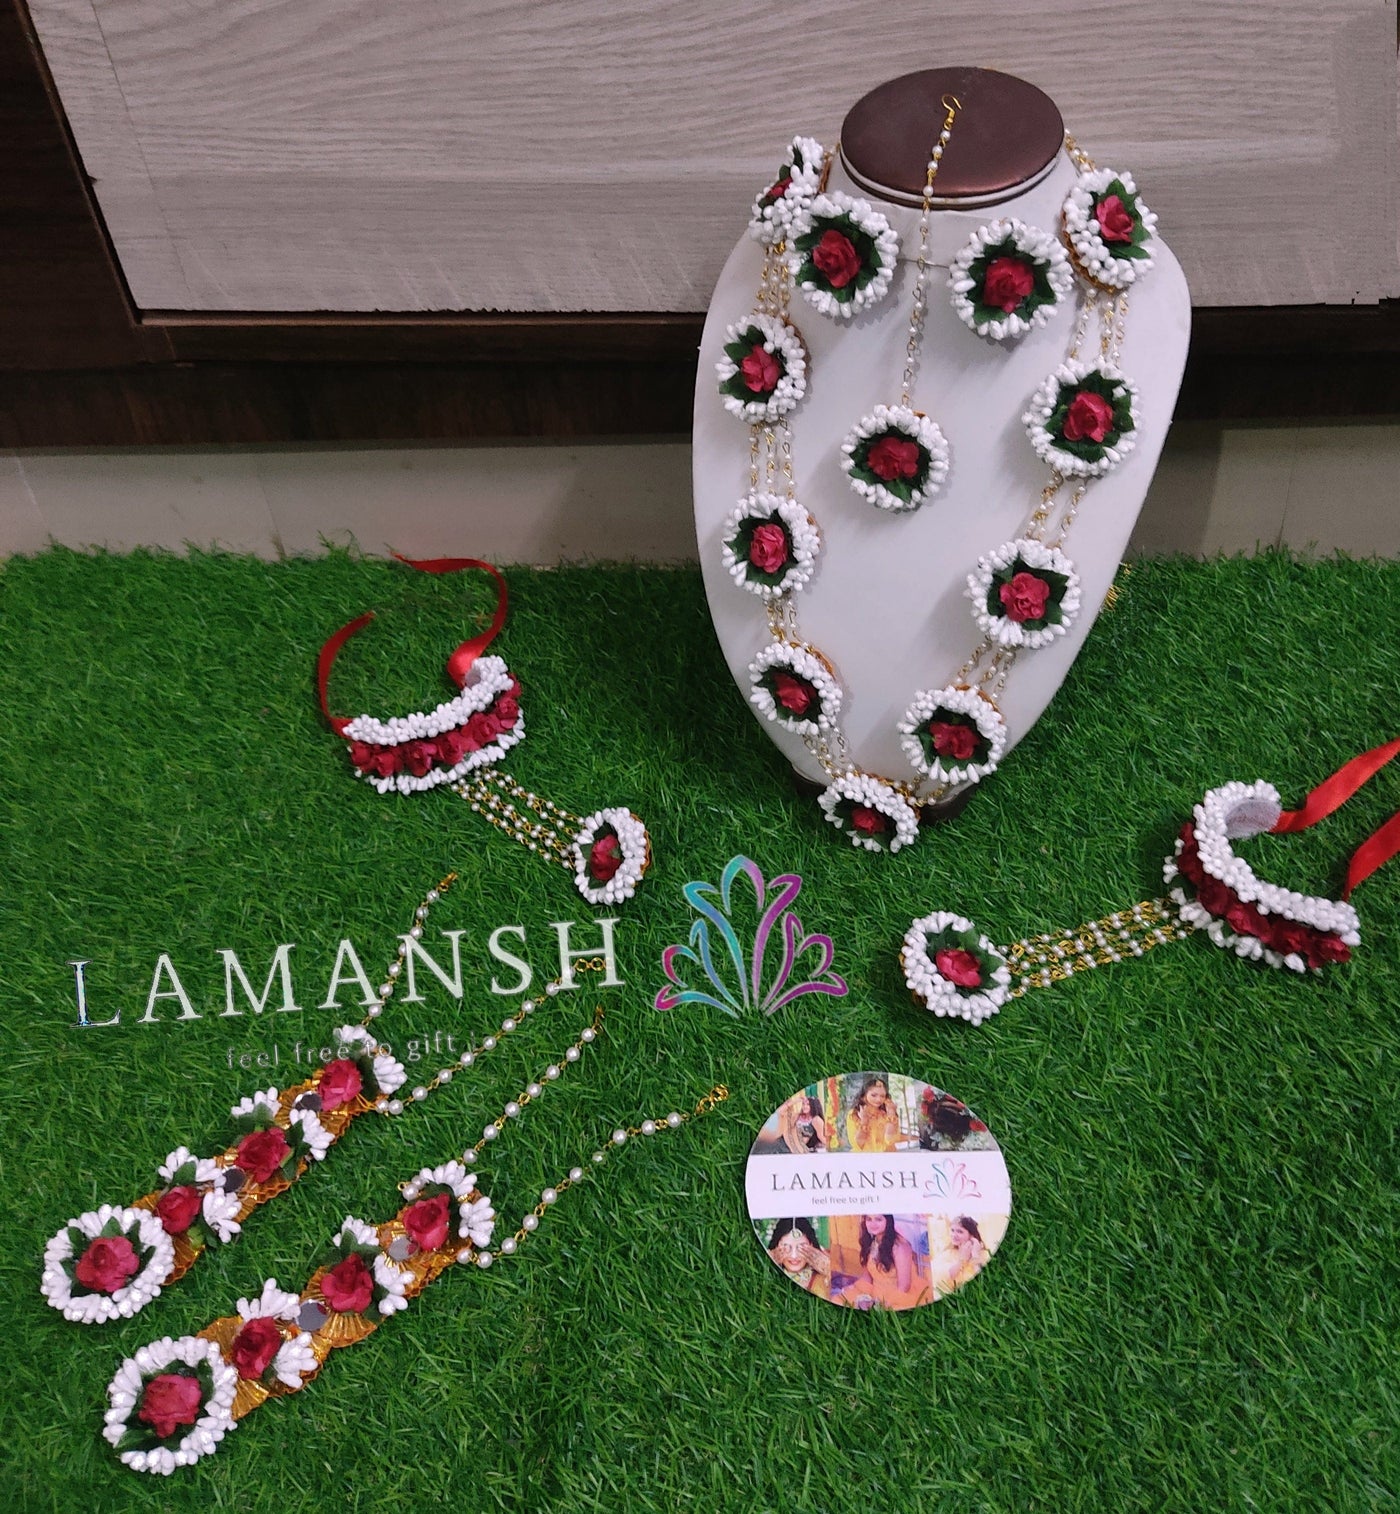 LAMANSH® Necklace Red & White Floral Jewellery Set 🌺 with Anklets